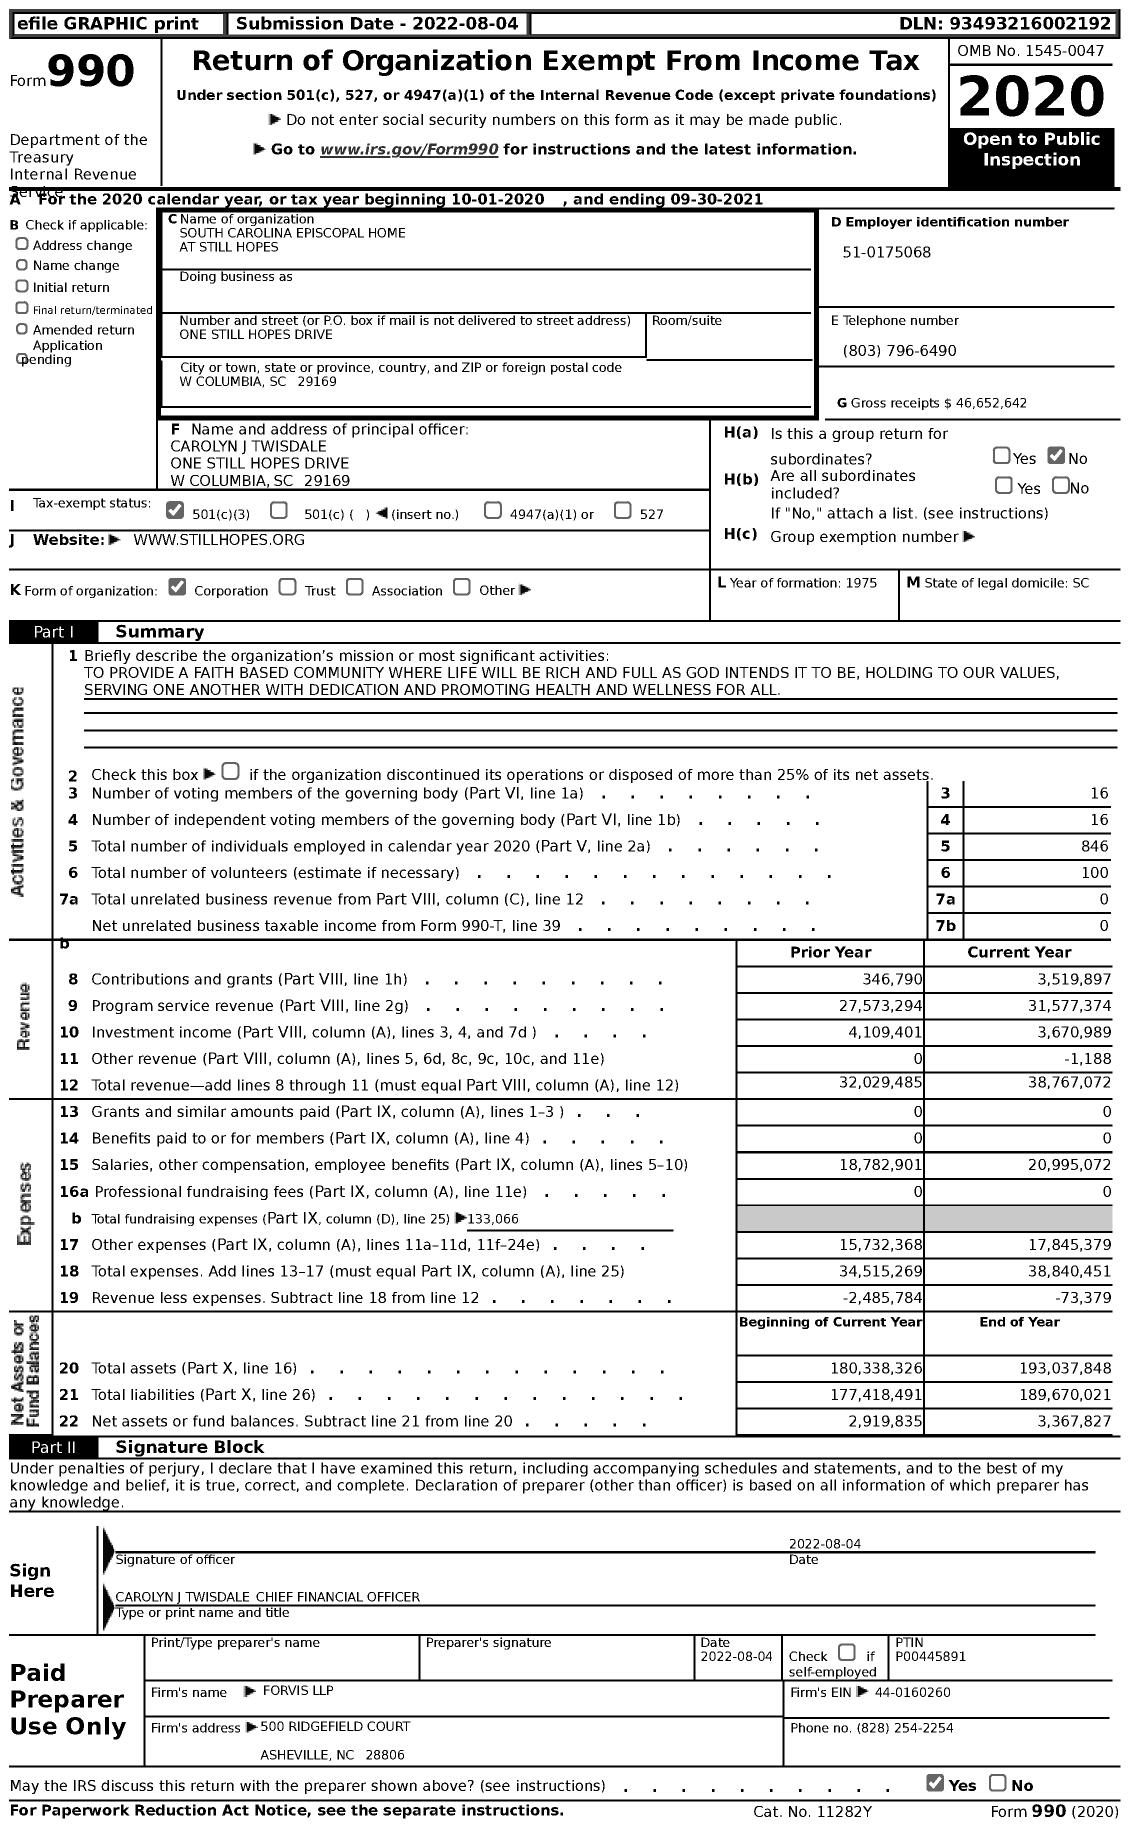 Image of first page of 2020 Form 990 for South Carolina Episcopal Home at Still Hopes